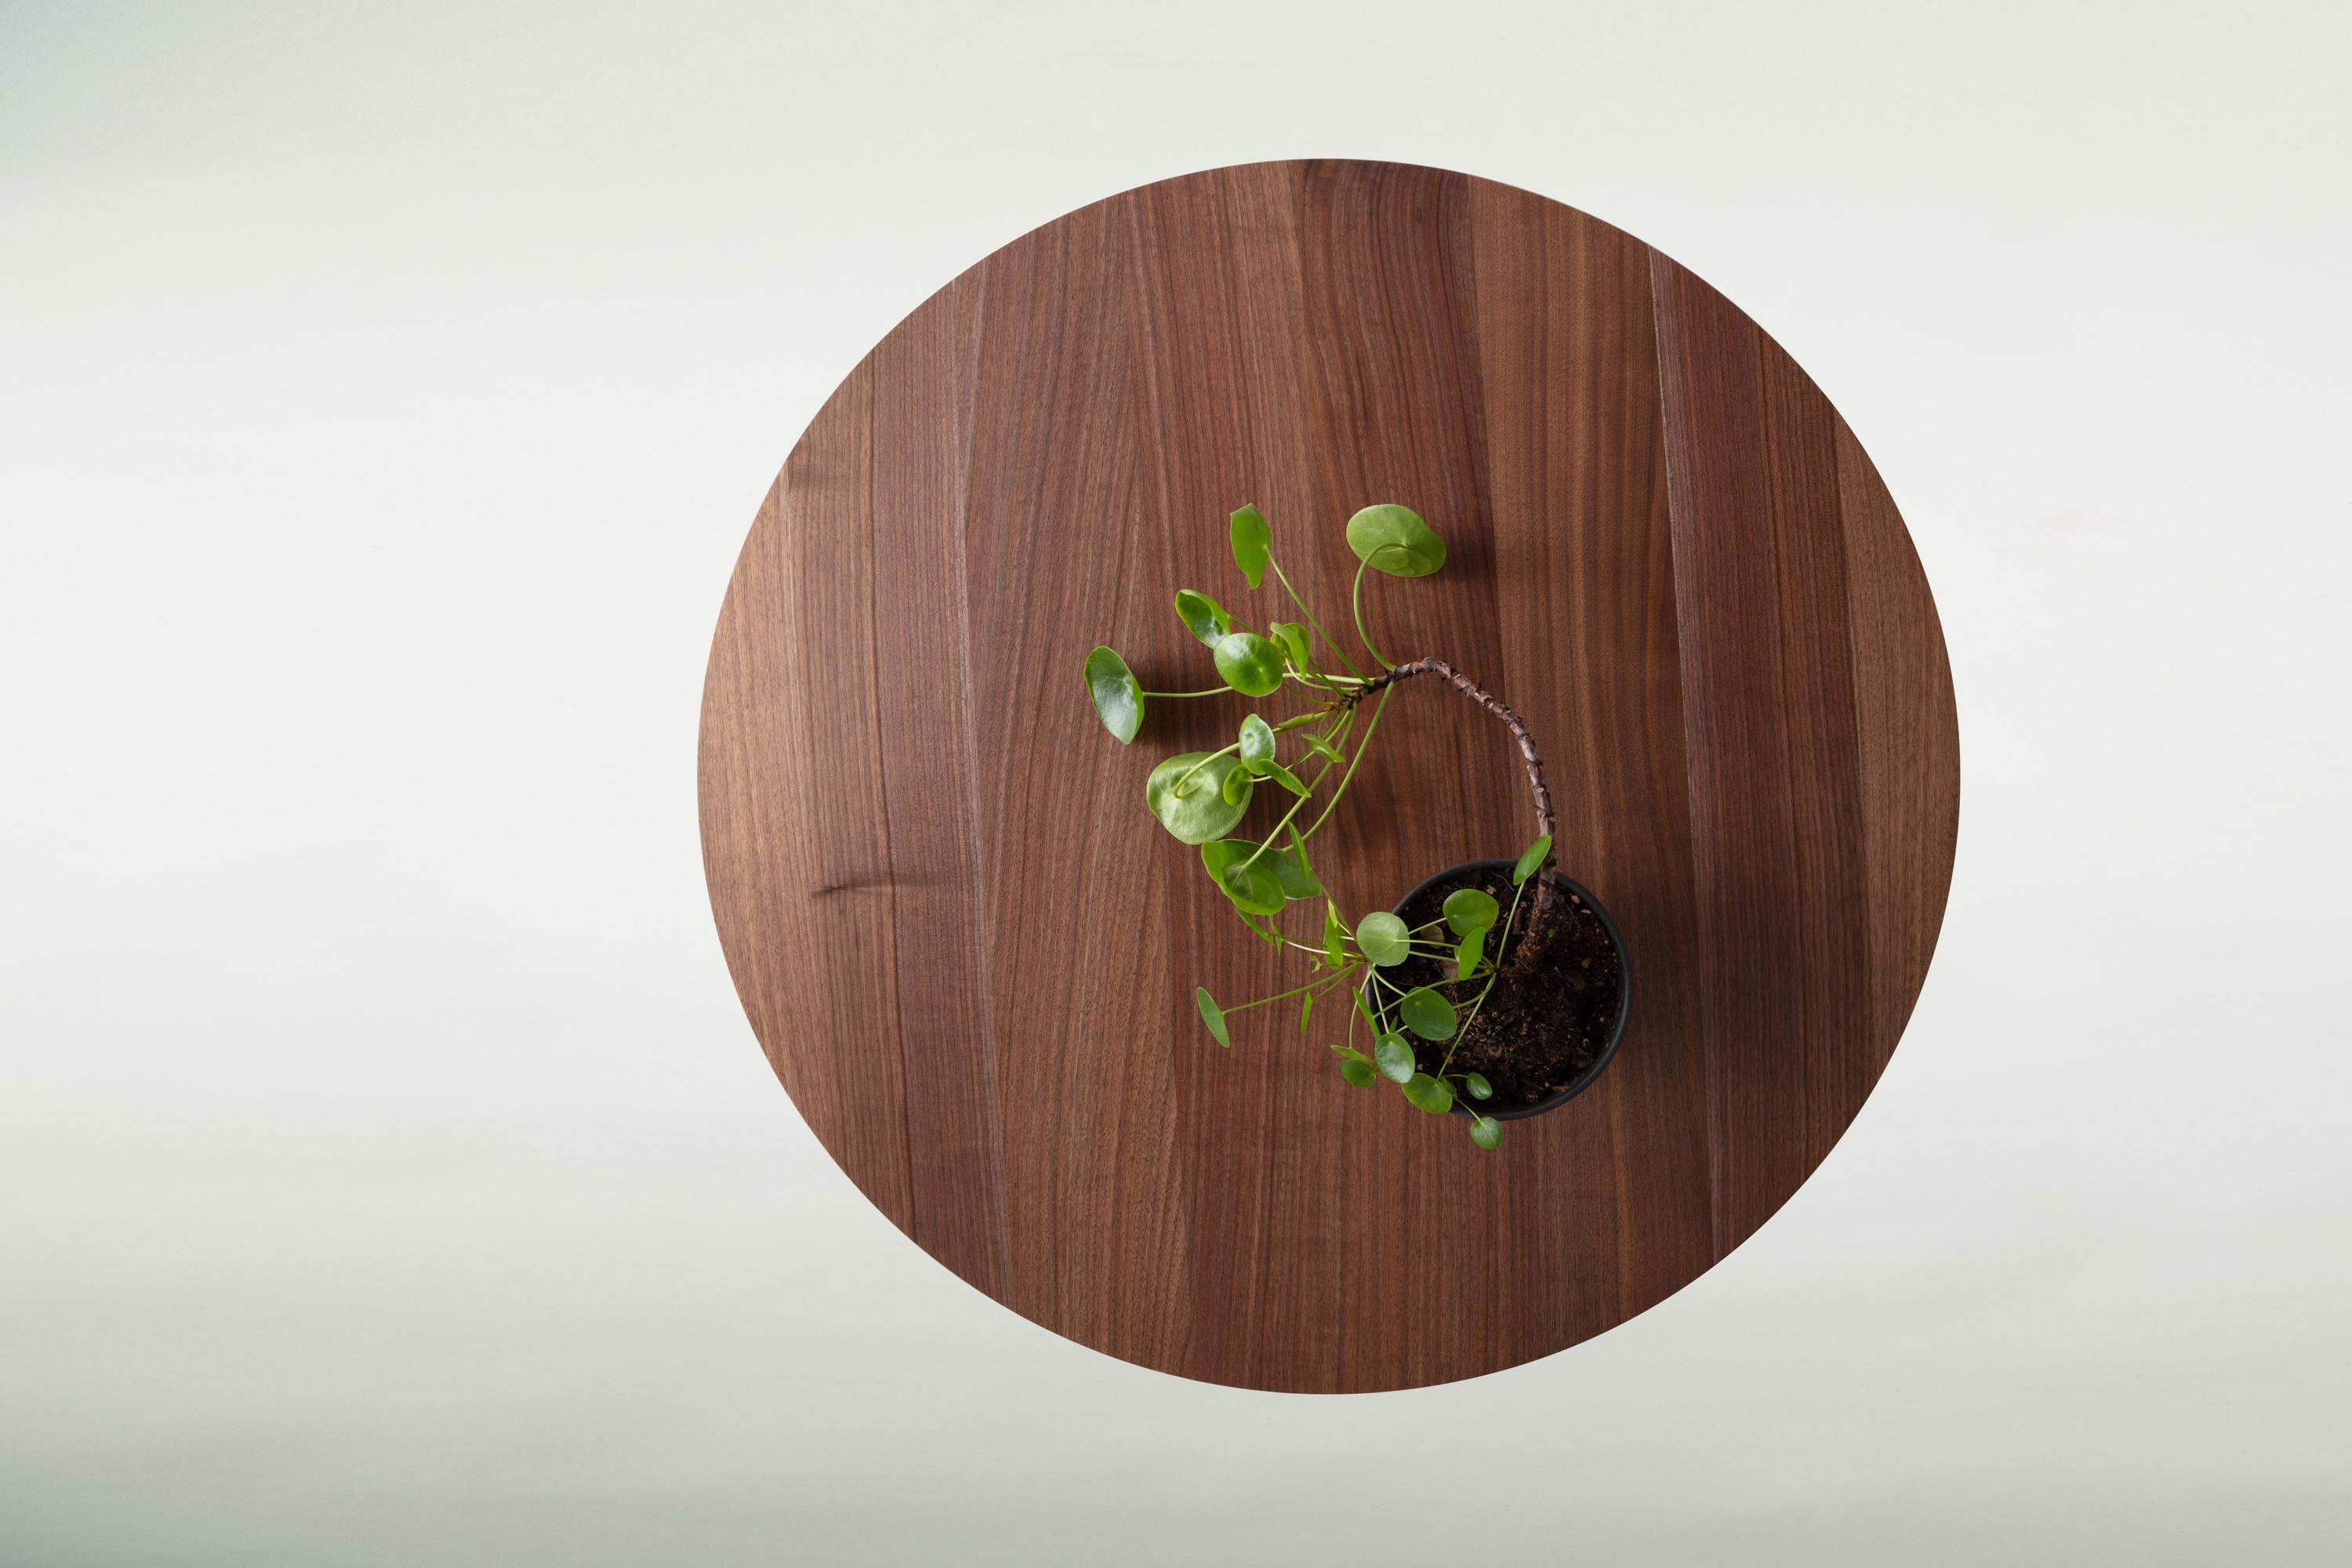 36 round dining table